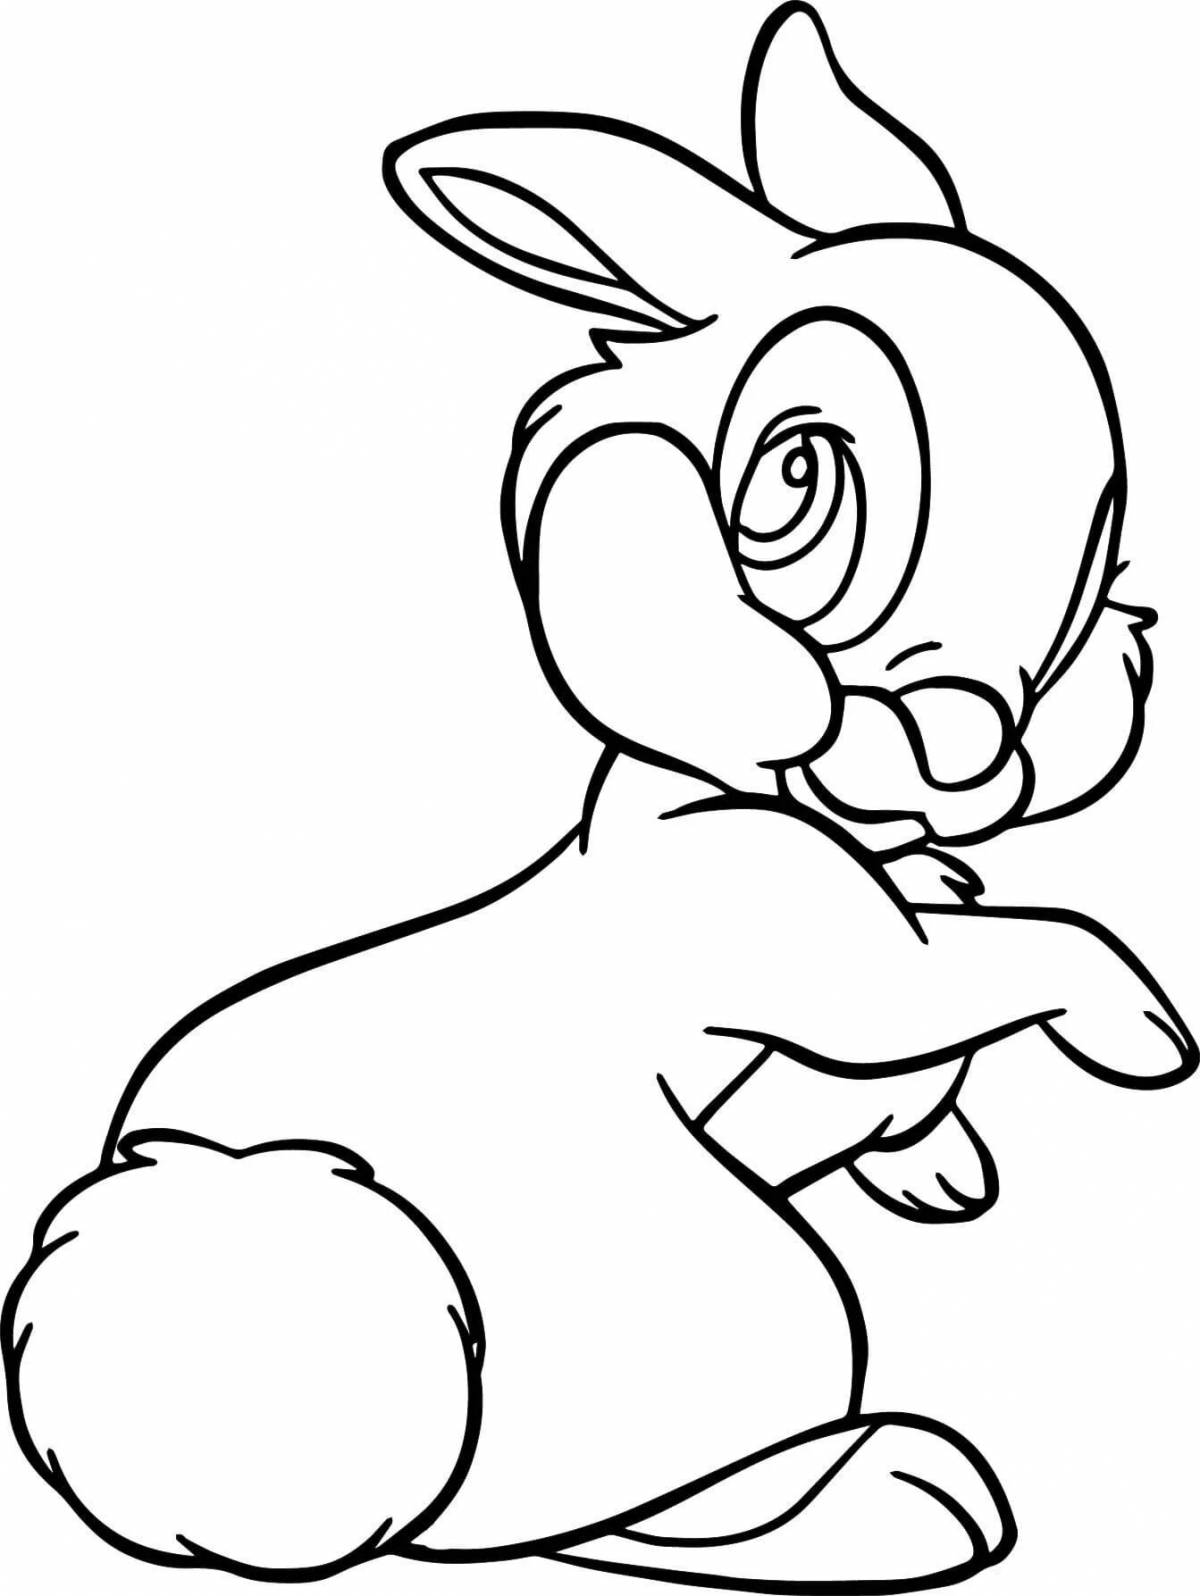 Leaving bambi hare coloring page